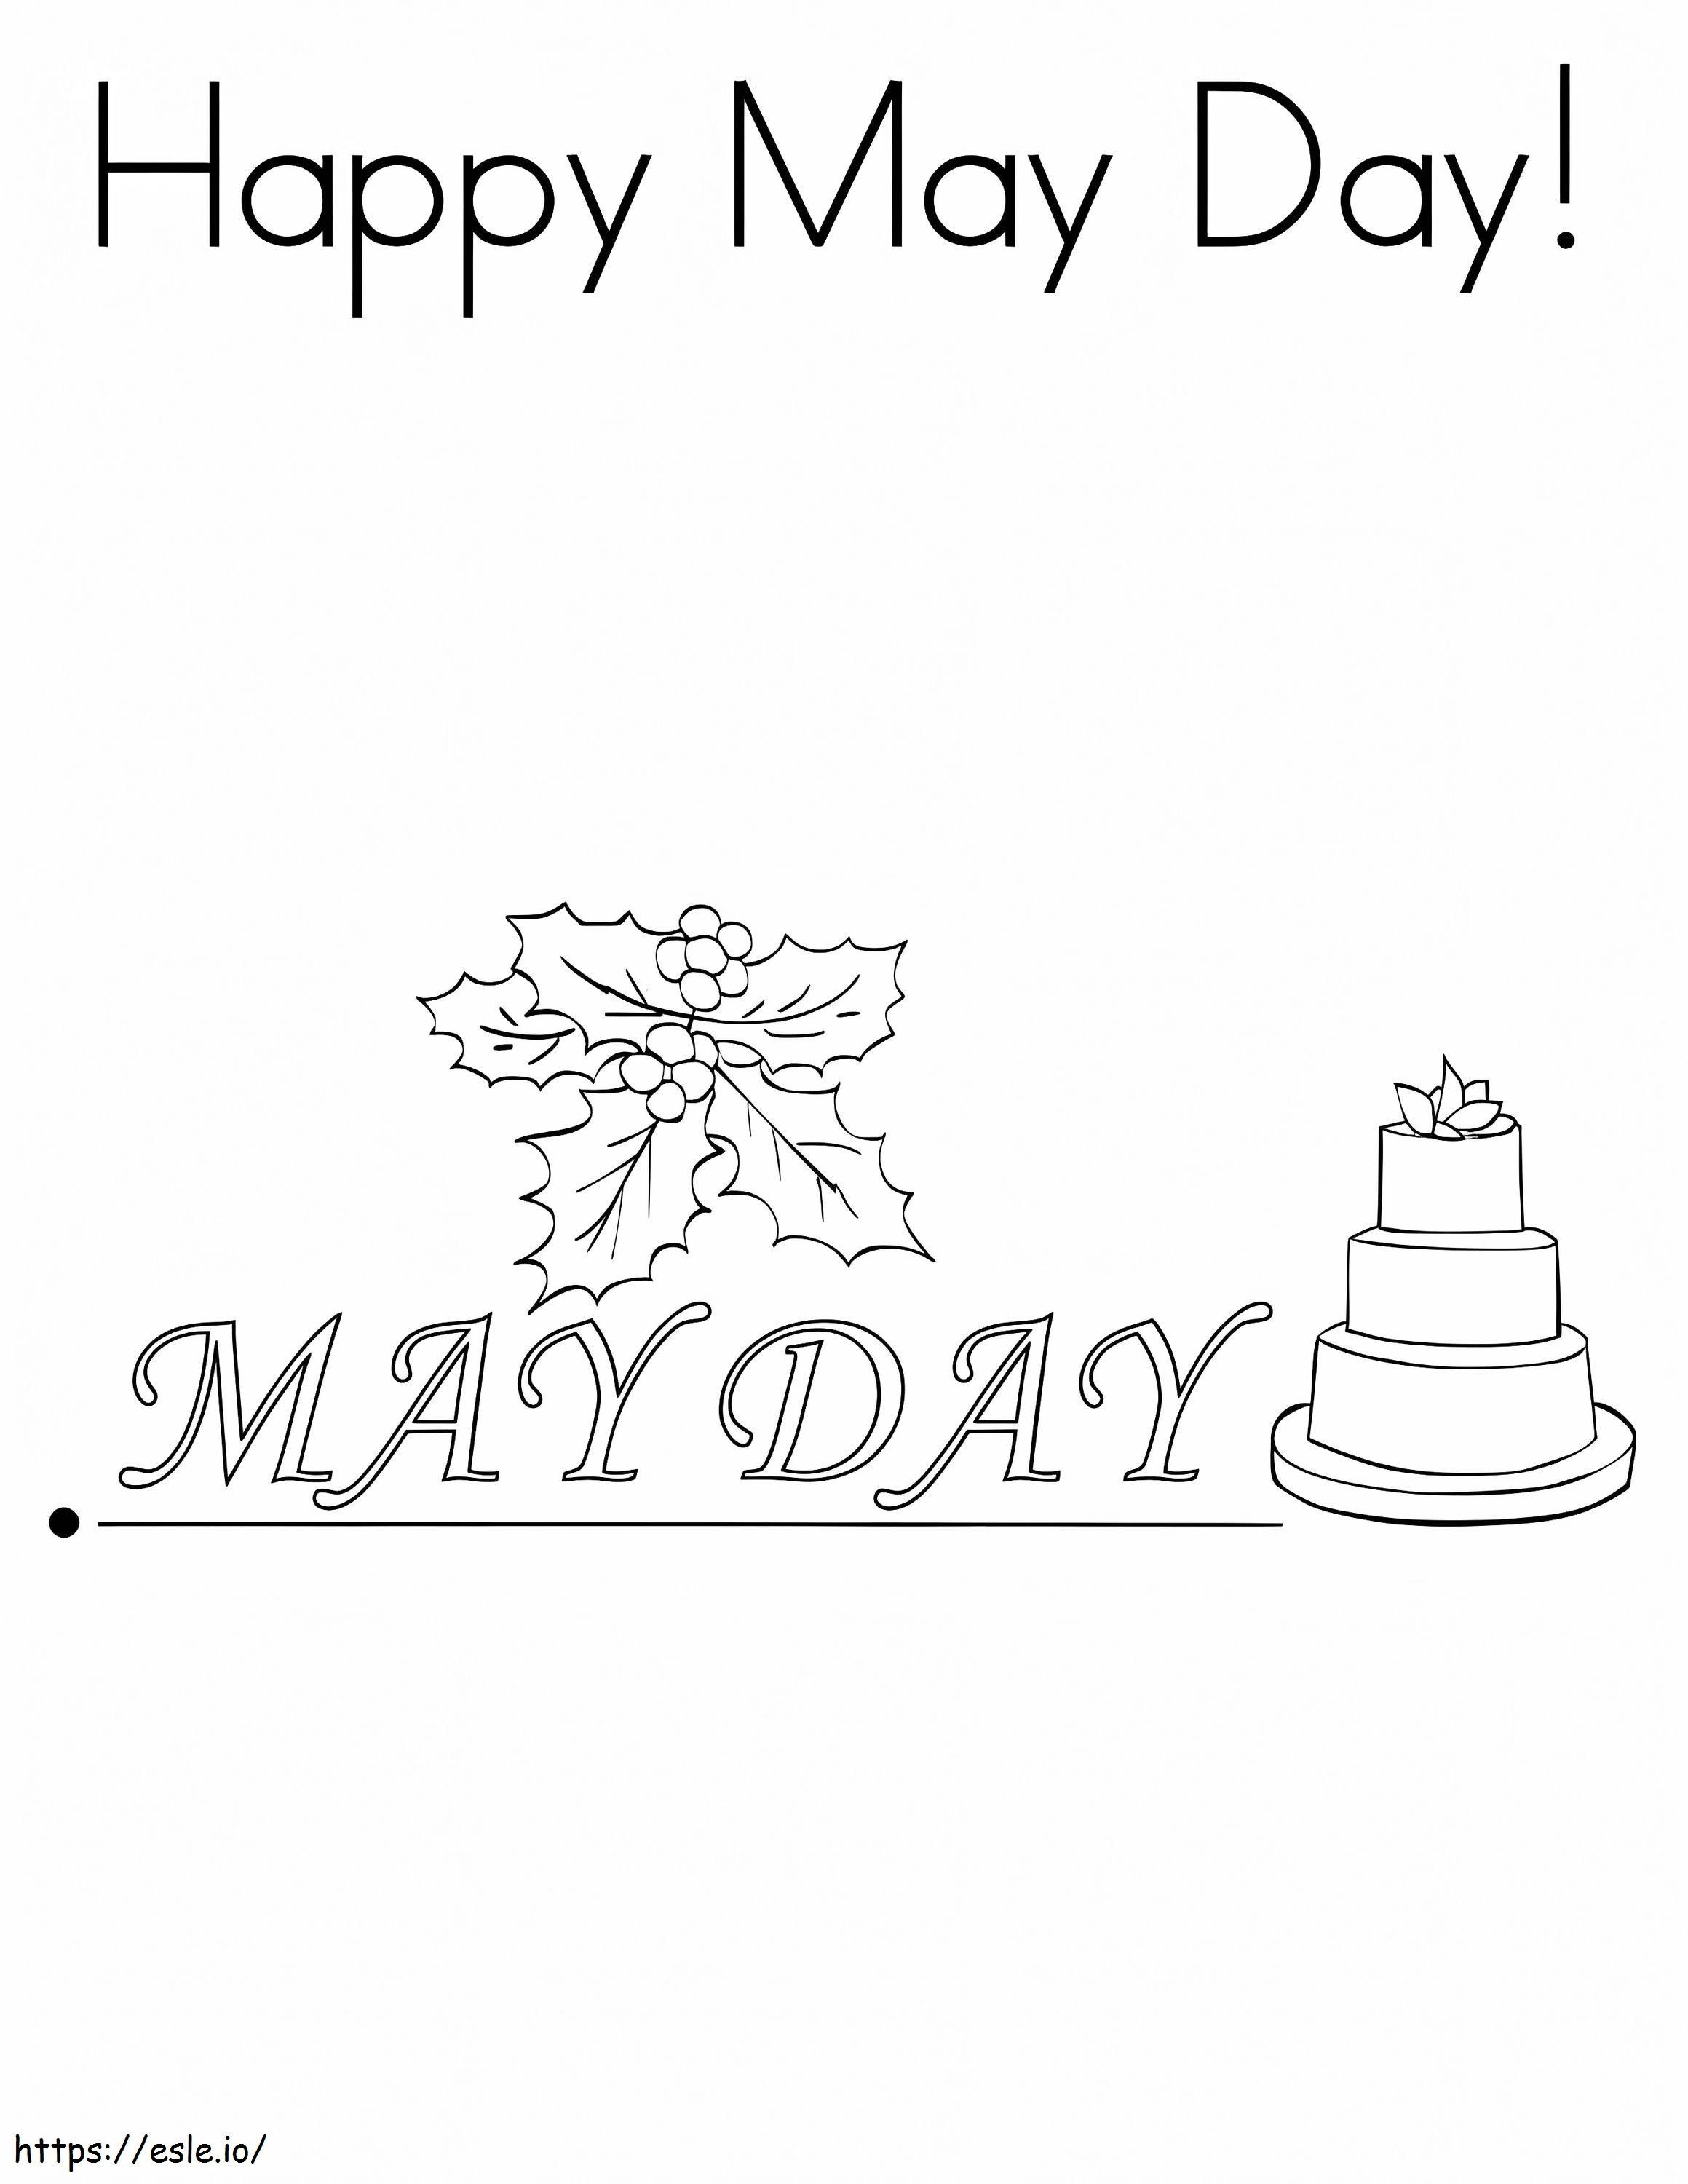 May Day 2 coloring page